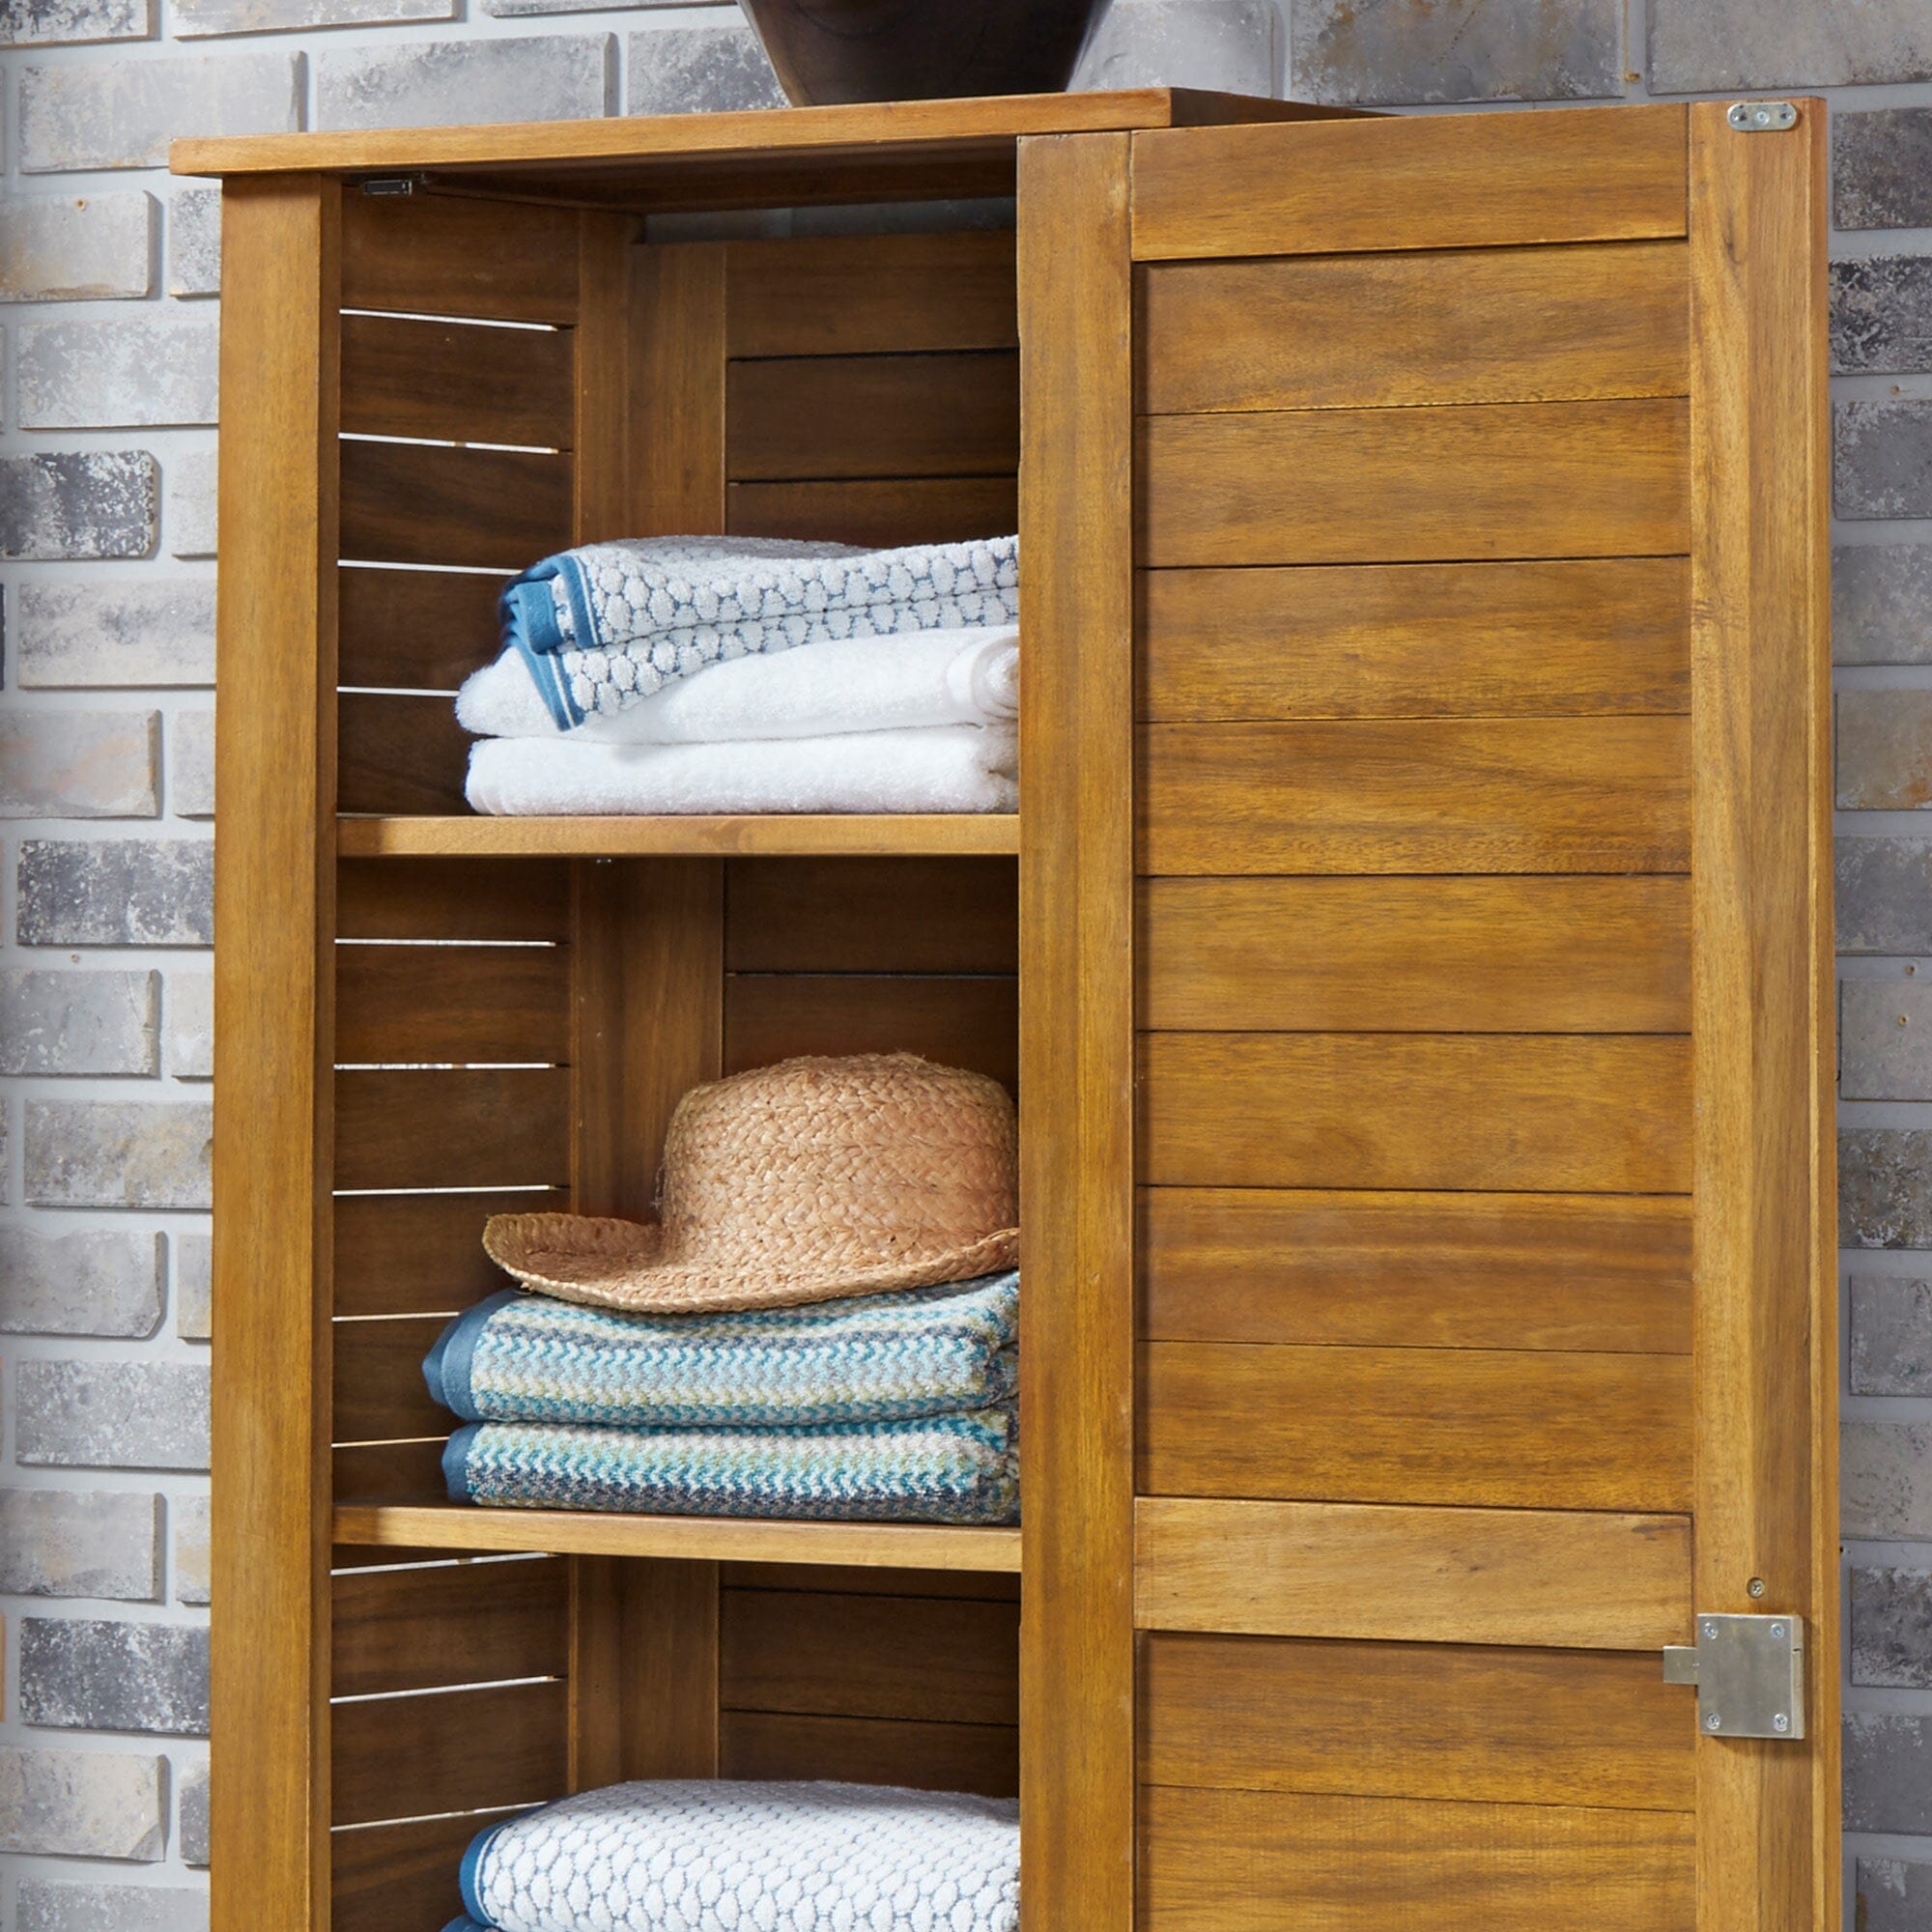 Traditional Storage Cabinet By Maho Outdoor Storage Maho